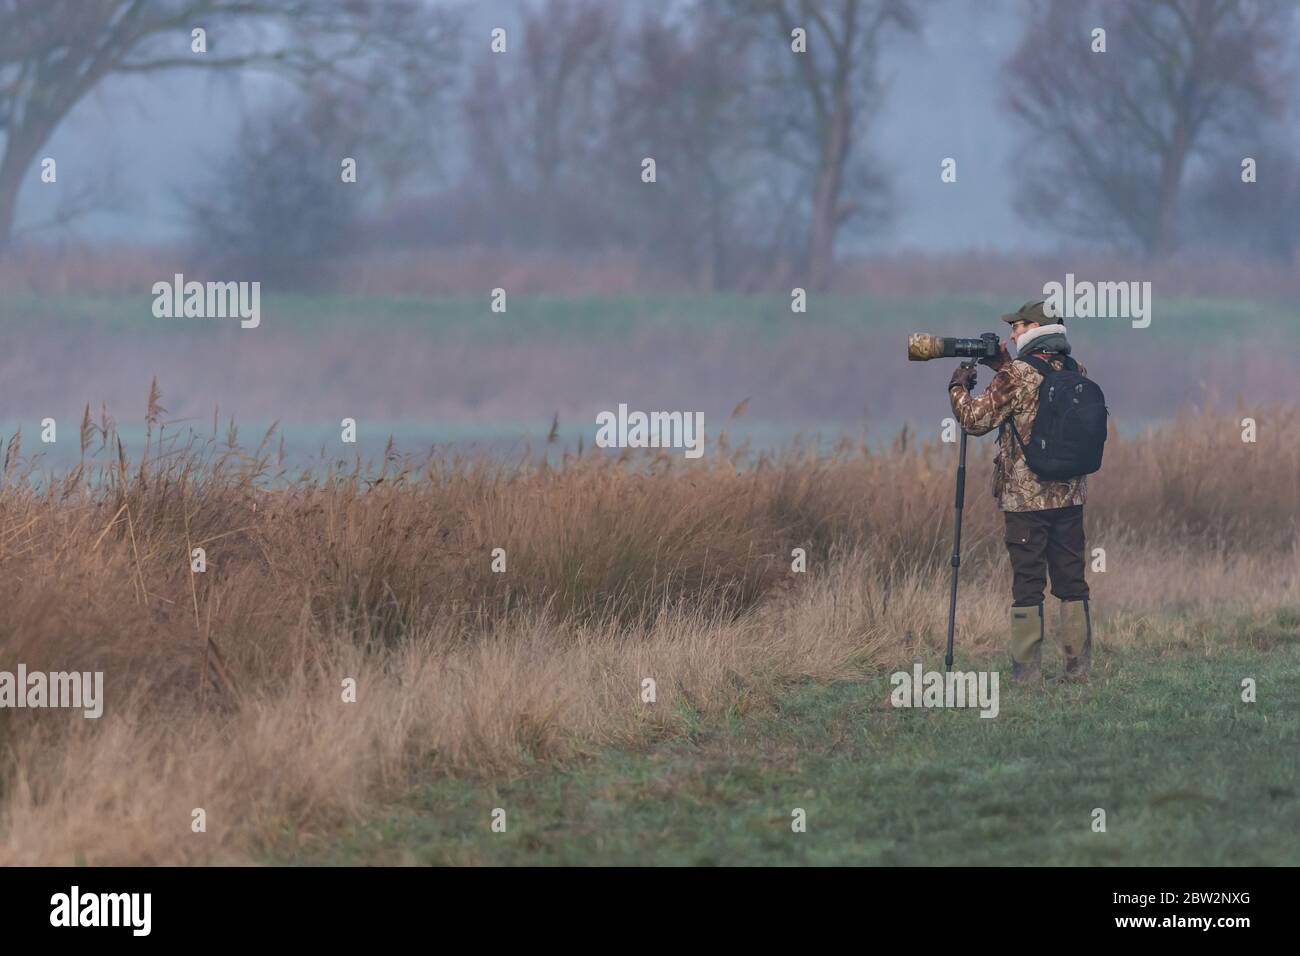 Nature photographer standing with zoom lens camera on tripod looking over marshland, wearing black backpack Stock Photo